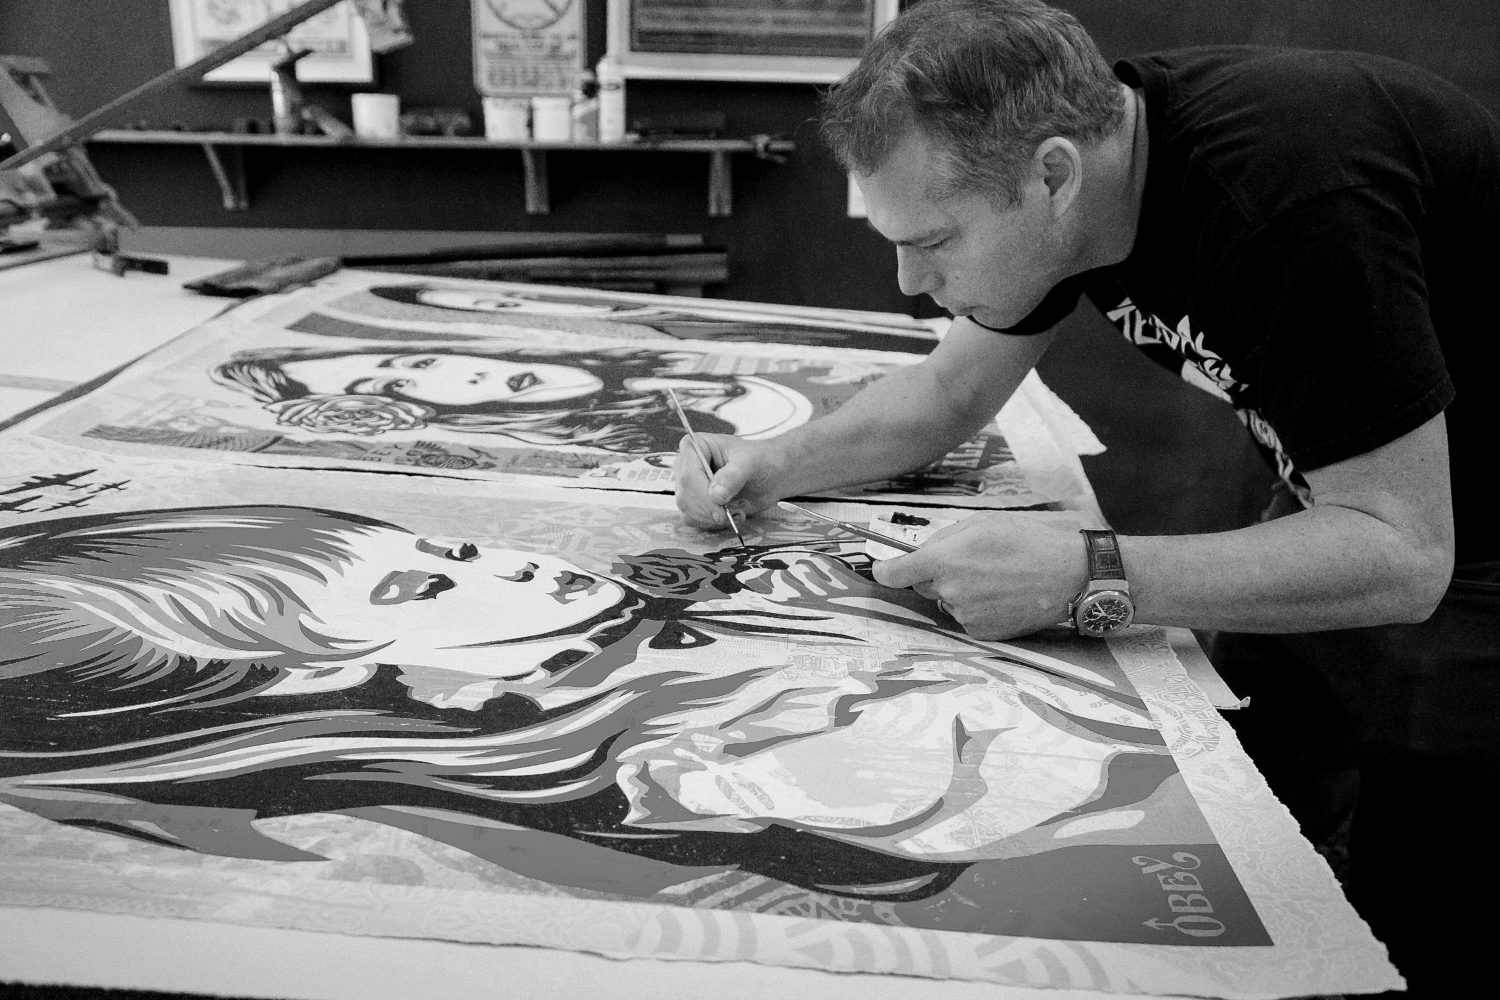 shepard fairey in the studio courtesy of the artist and over the influence 331730